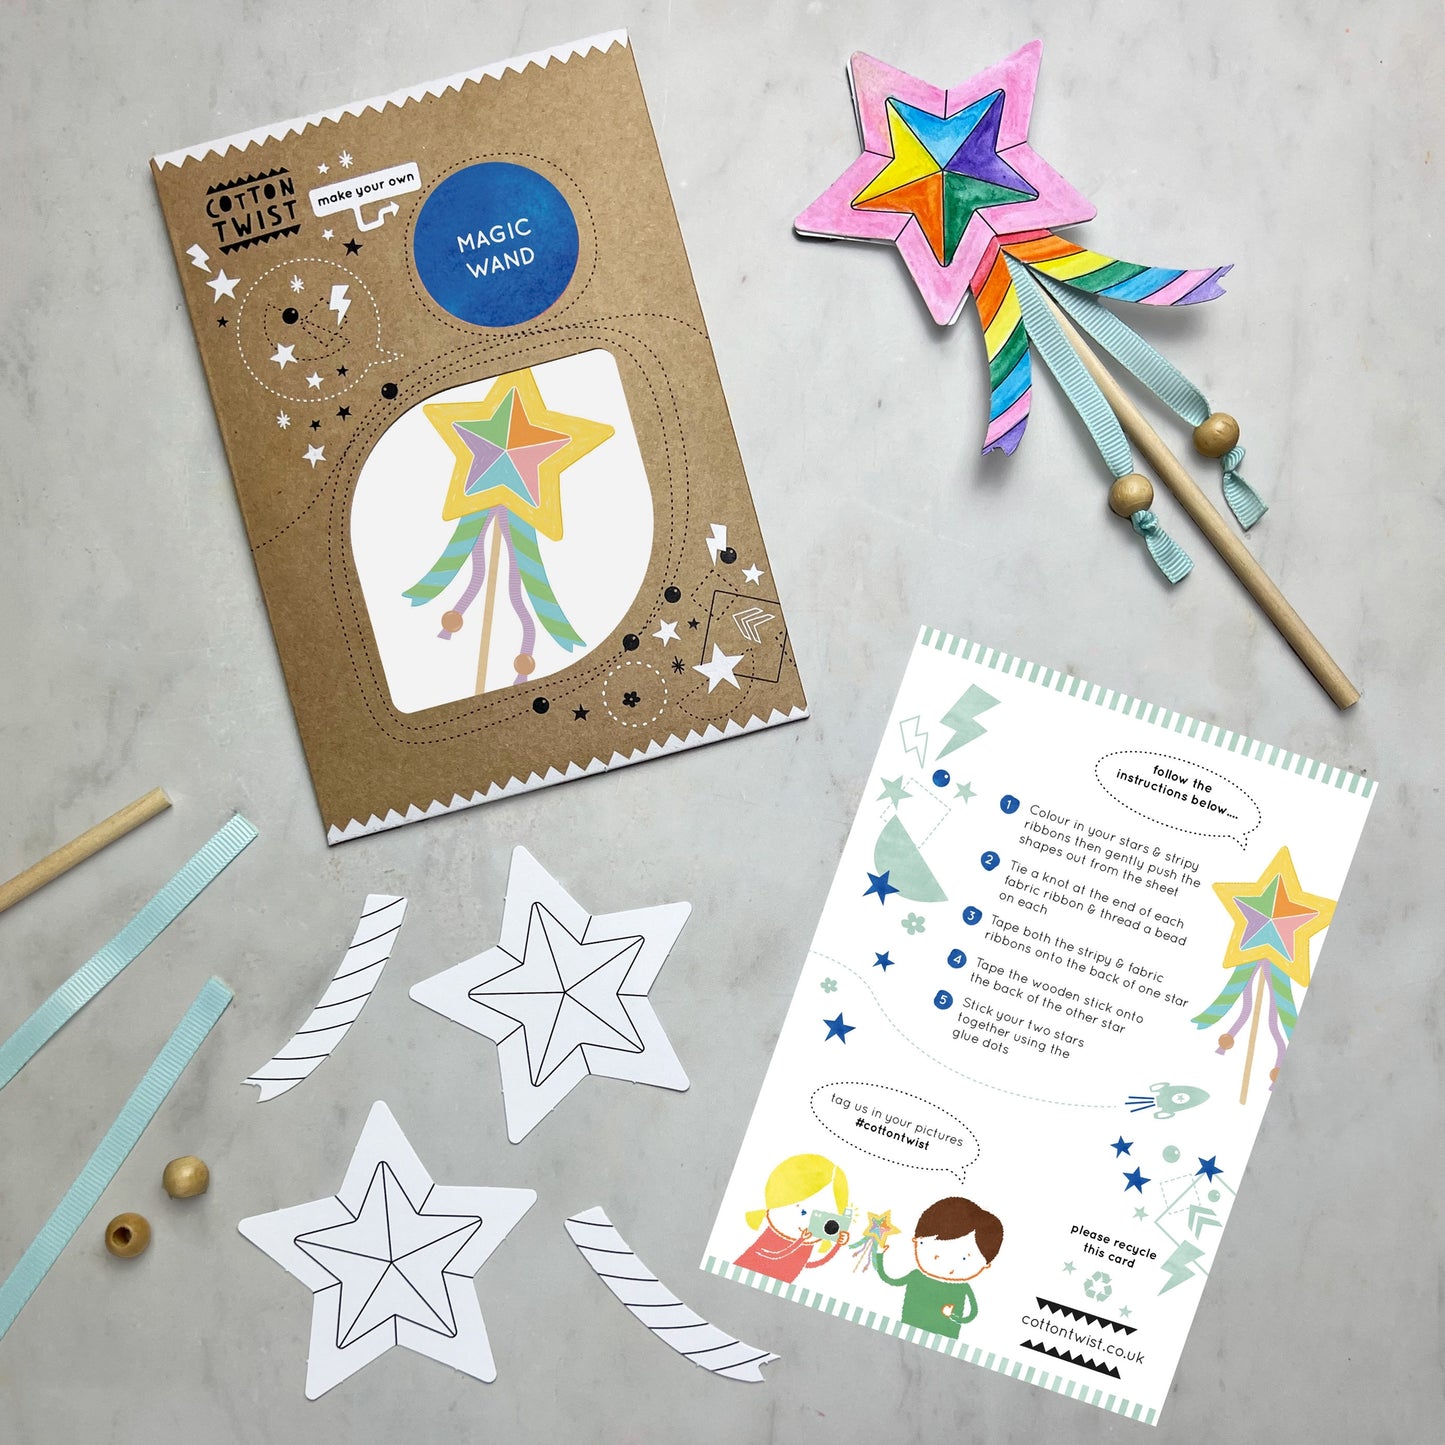 Children can colour the star & ribbon cut outs with their chosen pattern, then it's time to construct their wand. Once the stick & ribbons are taped on, the stars can be stuck together. Beads can be added to the base of the ribbons for additional effect. Time to wave those wands & spread the magic. Each kit is plastic free & lovingly assembled by hand.v